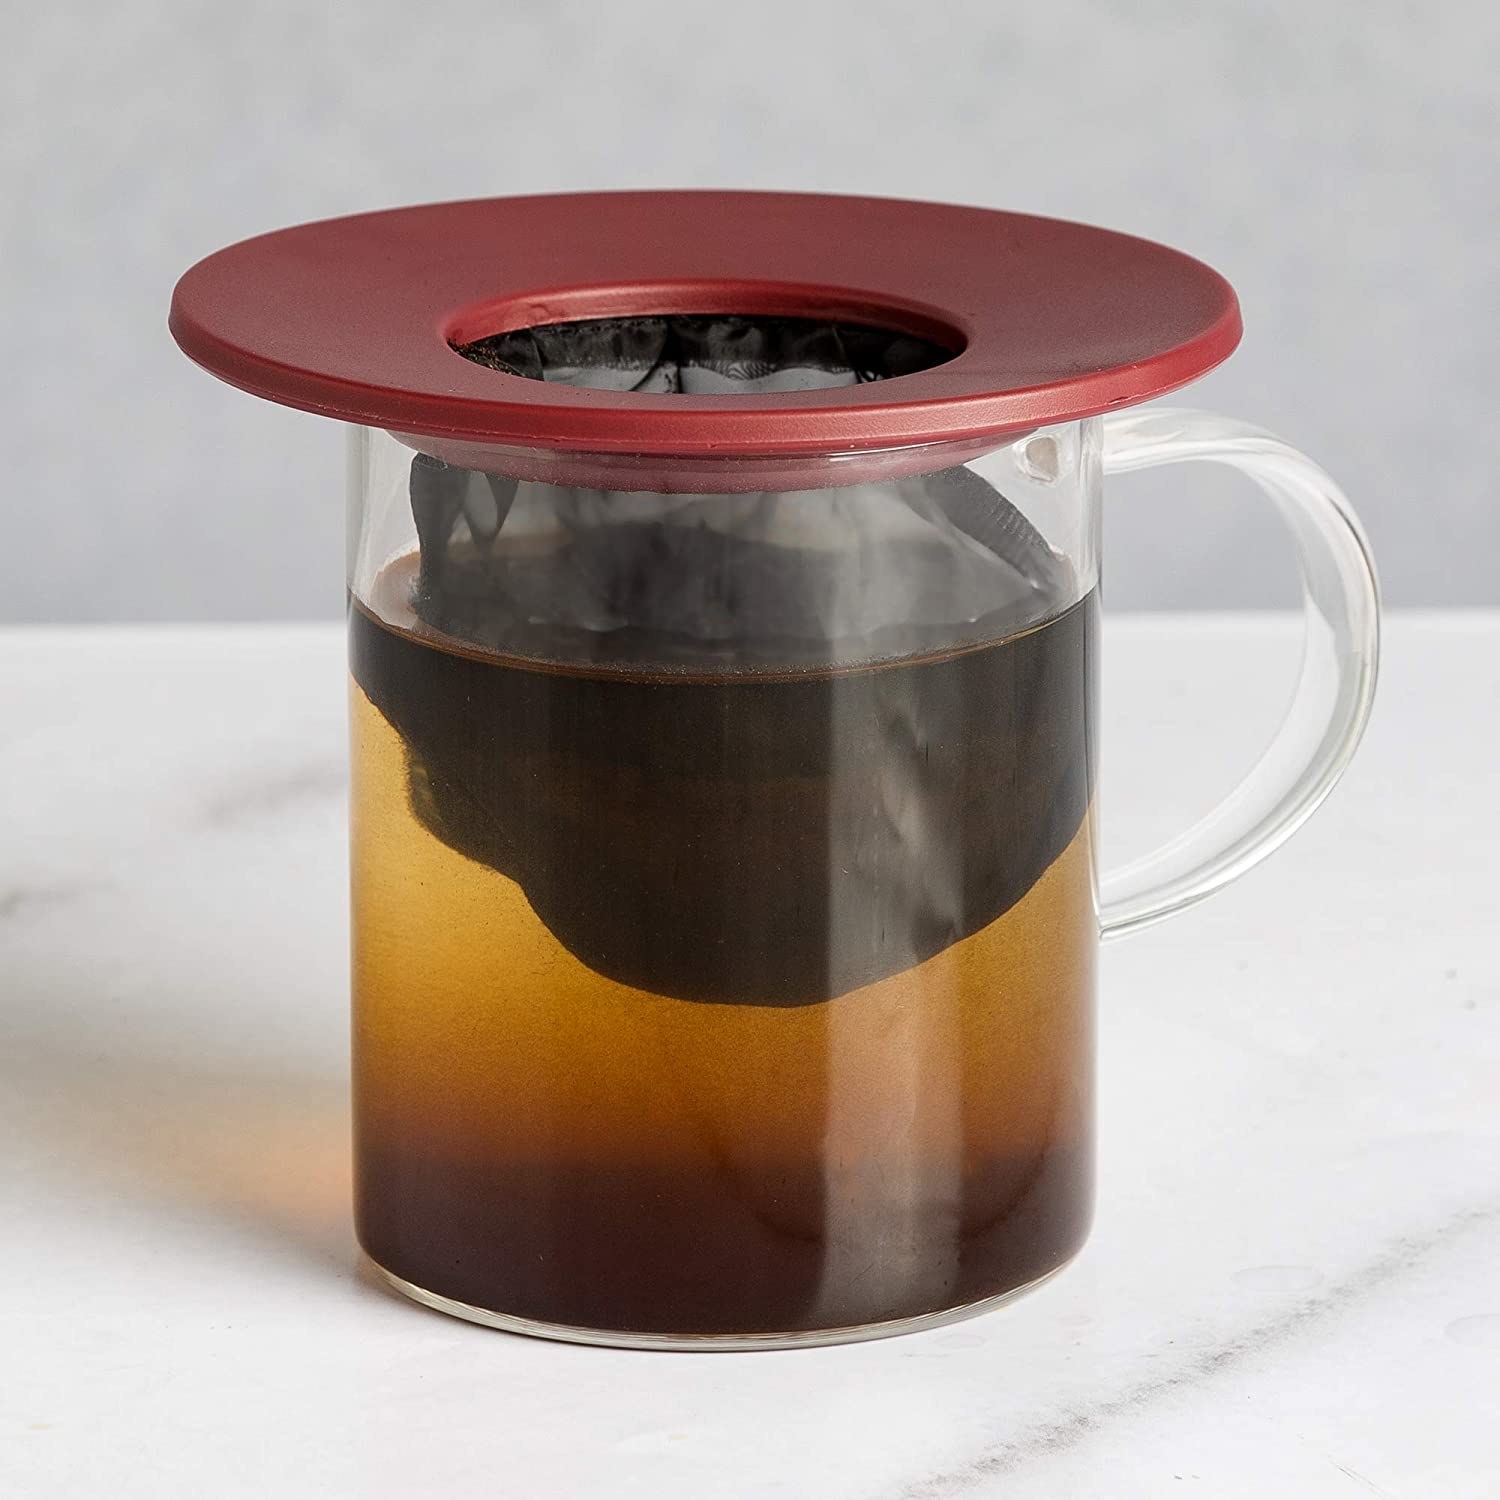 A mug with the coffee brewer placed on the top